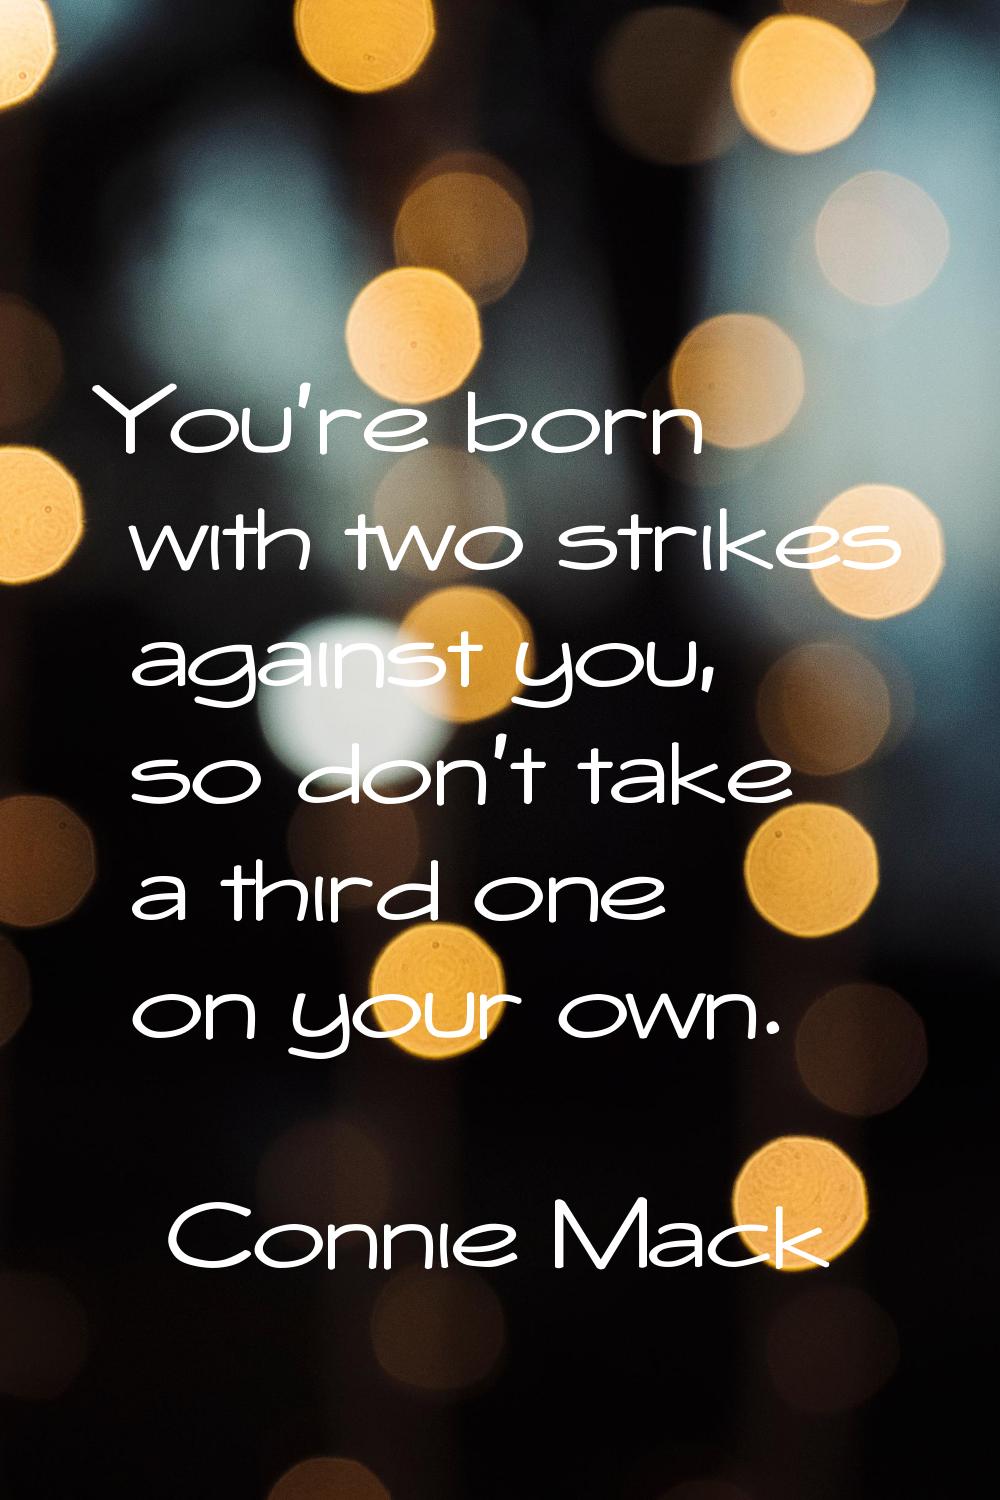 You're born with two strikes against you, so don't take a third one on your own.